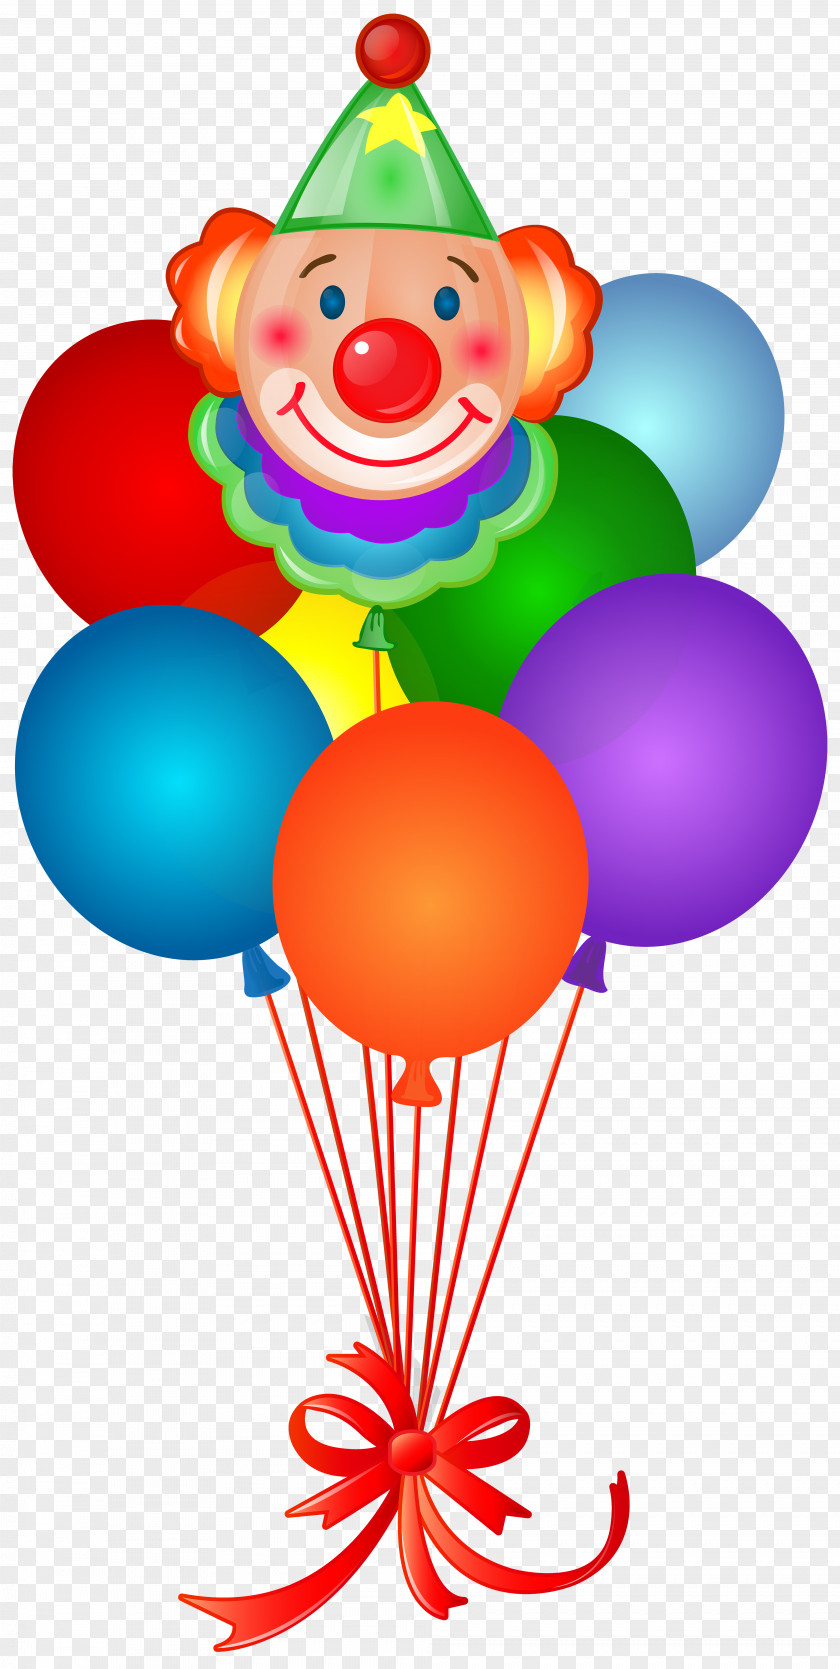 Clown Birthday Cake Happy To You Balloon Party PNG